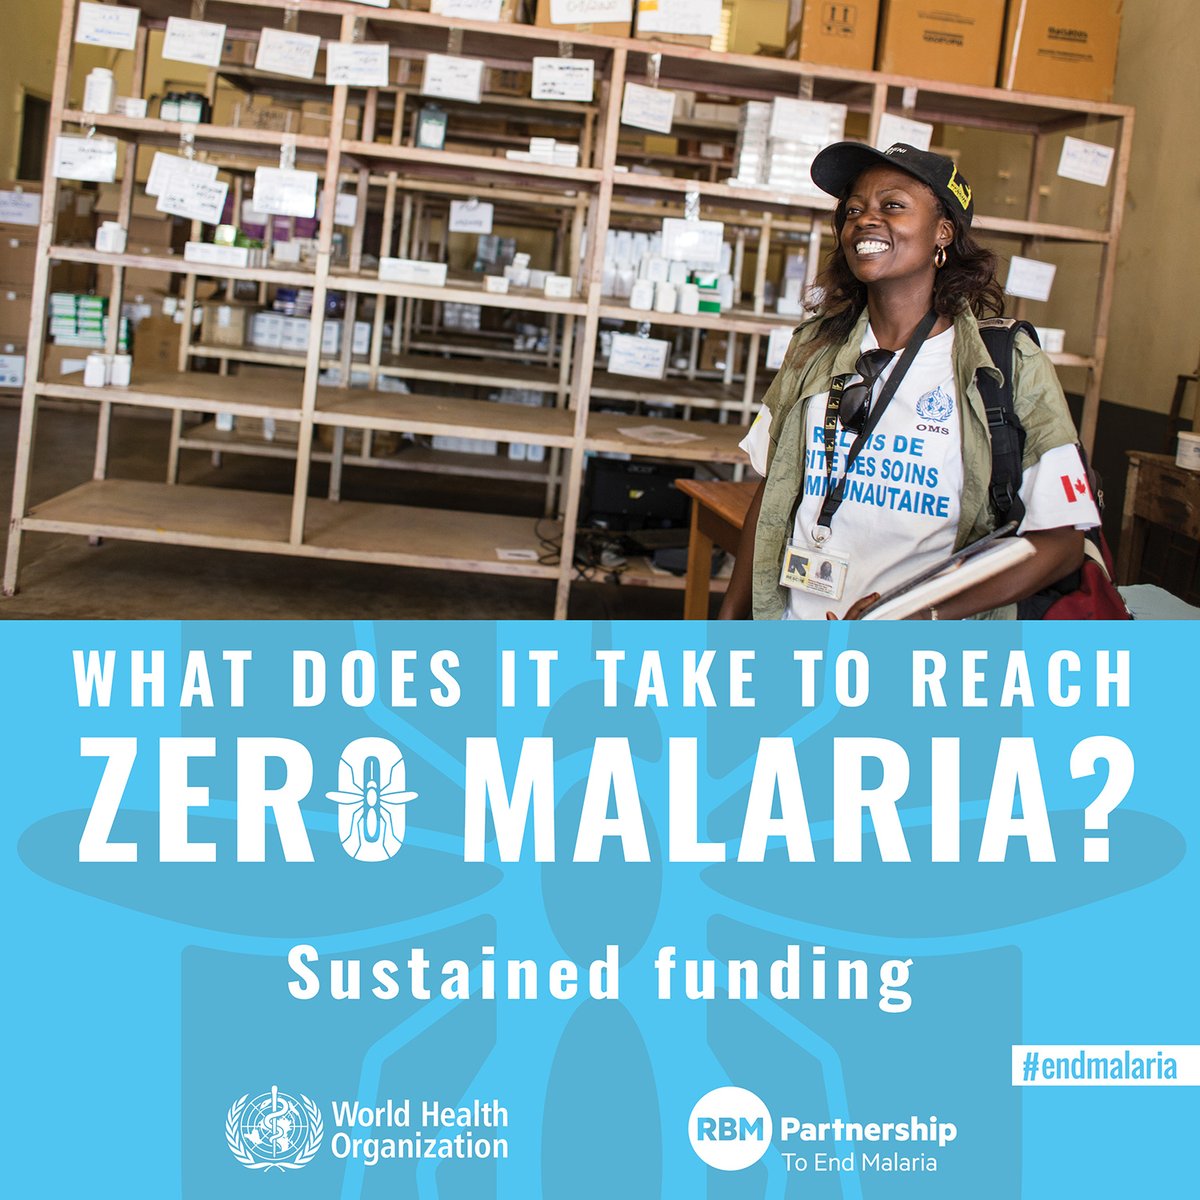 Today is  #WorldMalariaDayMost countries that succeed in eliminating  #malaria cover the cost through domestic funding that is sustained over a period of many decadesSustained funding is  to  #EndMalaria  https://bit.ly/32uKPFH 